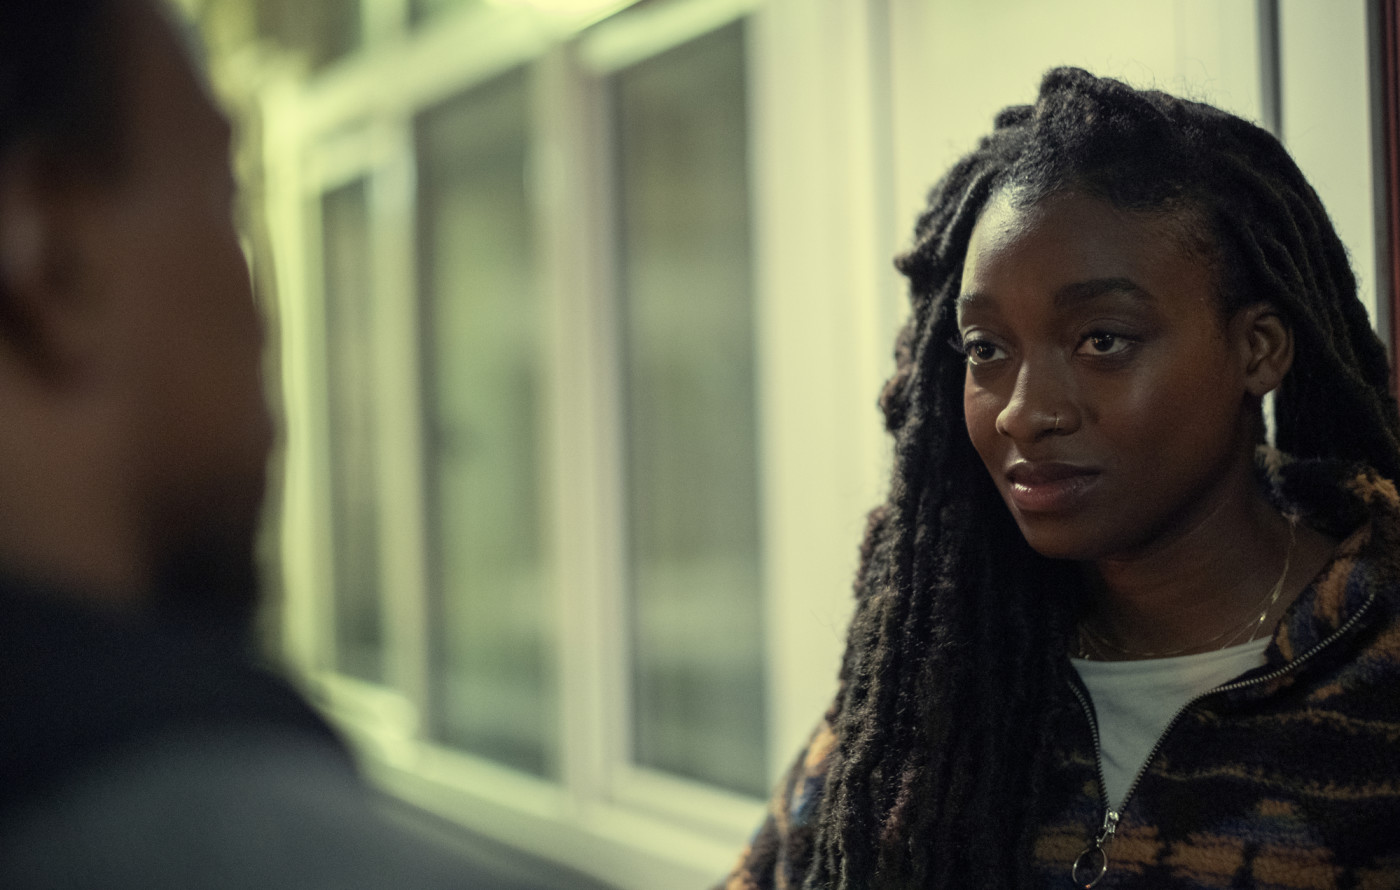 Little Simz, Kano Spotted Filming Scenes In East London | UK